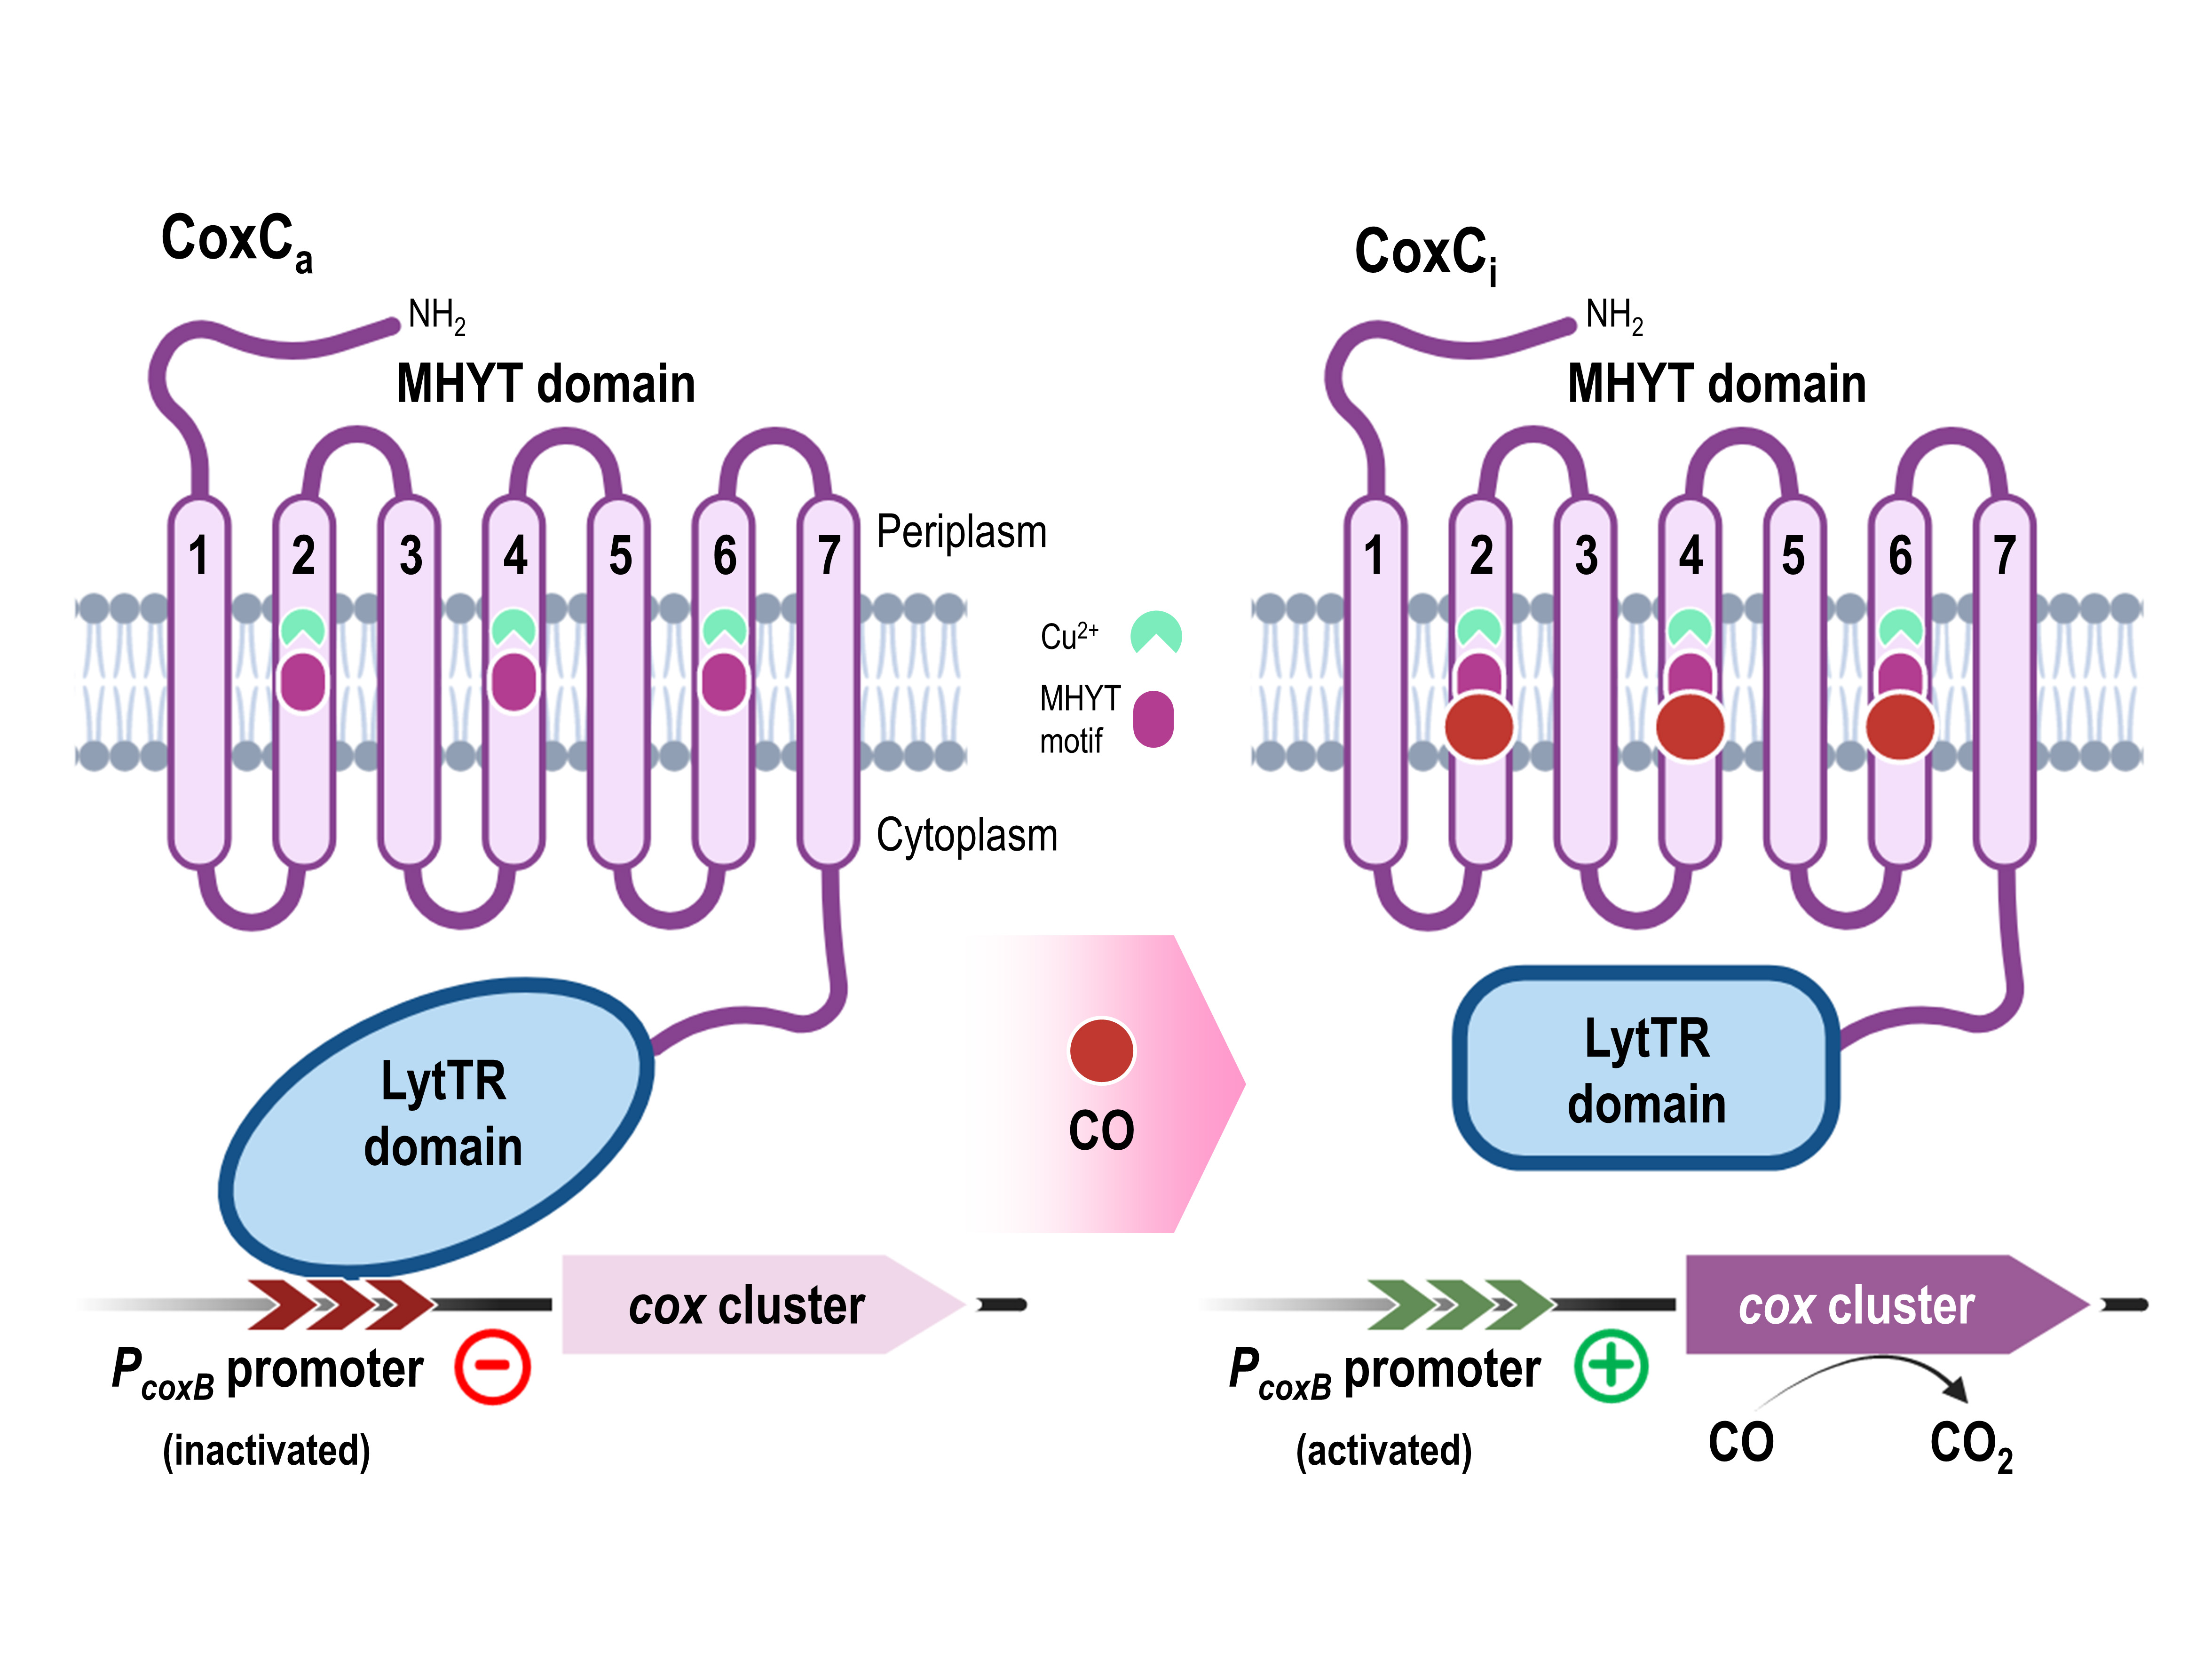 Scheme of the mechanism of action of the CoxC transcriptional repressor containing a membrane MHTY domain capable of recognizing the toxic gas CO and inducing the expression of cox genes for aerobic CO oxidation.